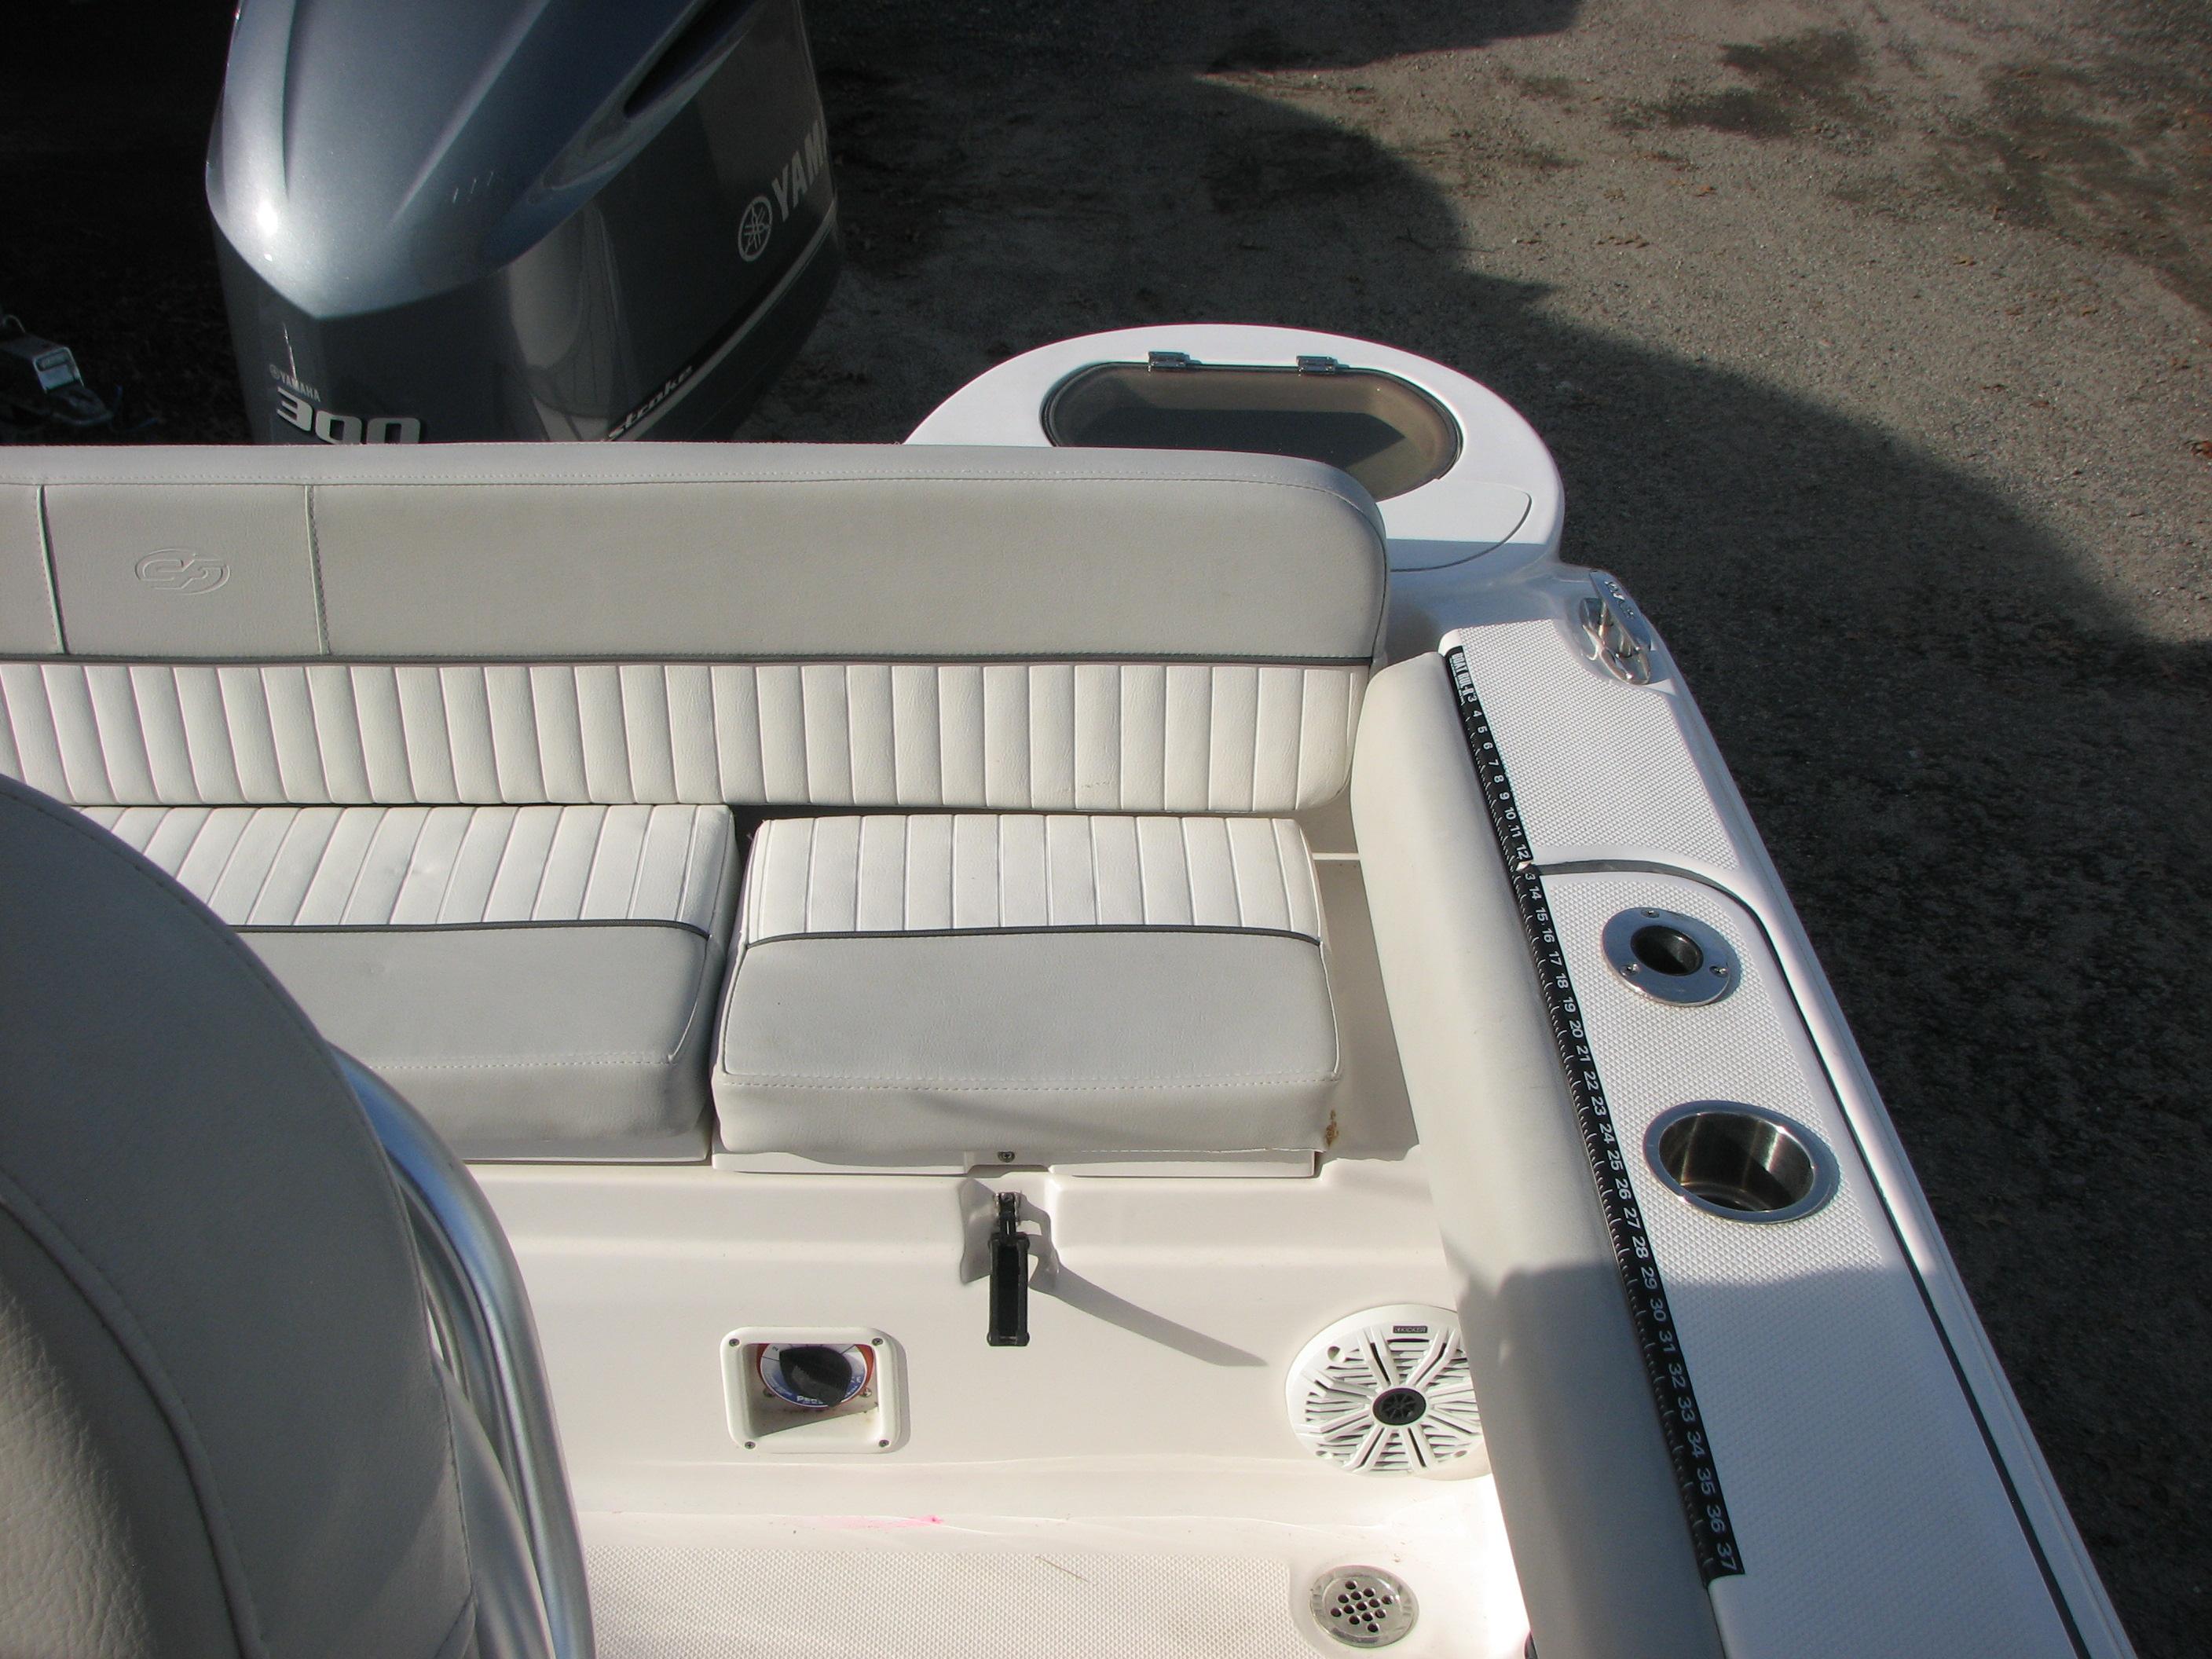 Full Transom Seating, livewell